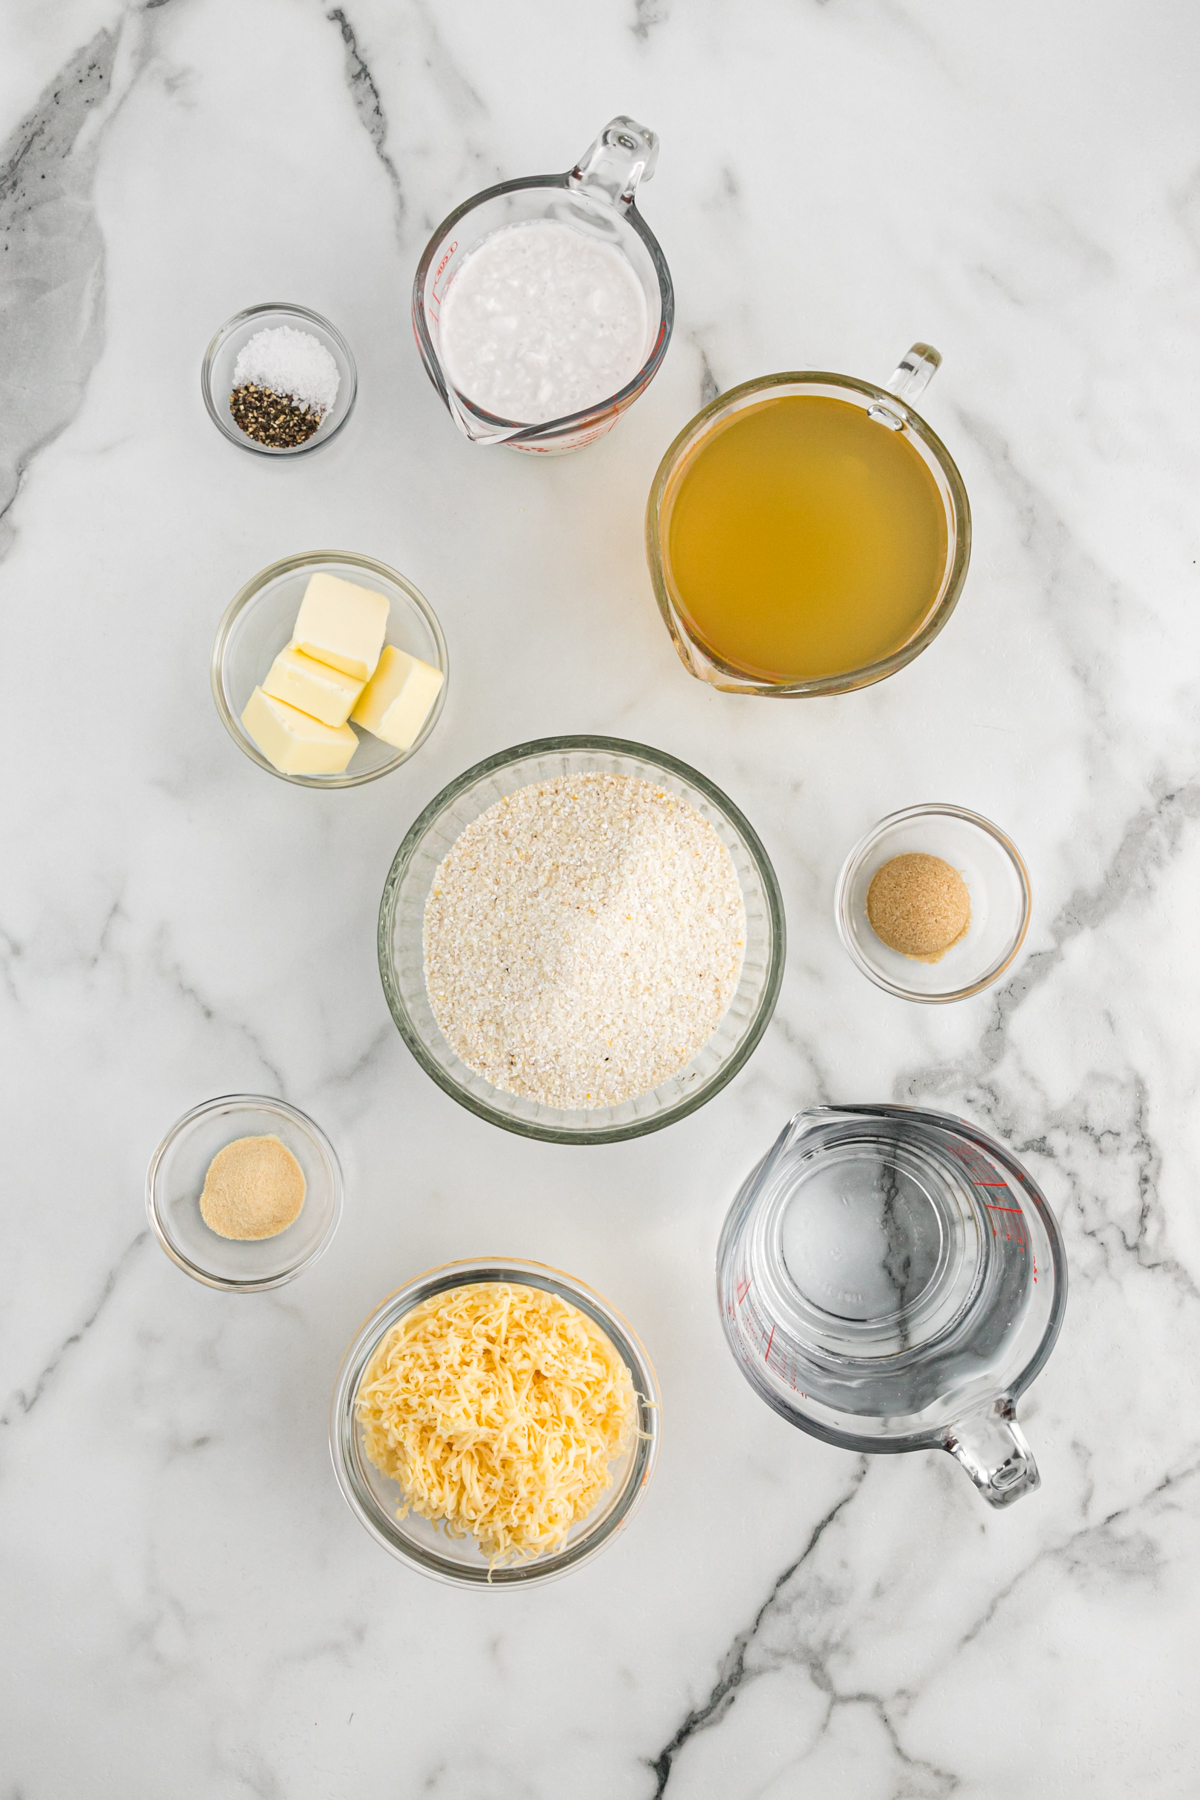 Ingredients for cheesy grits in bowls on a white counter.